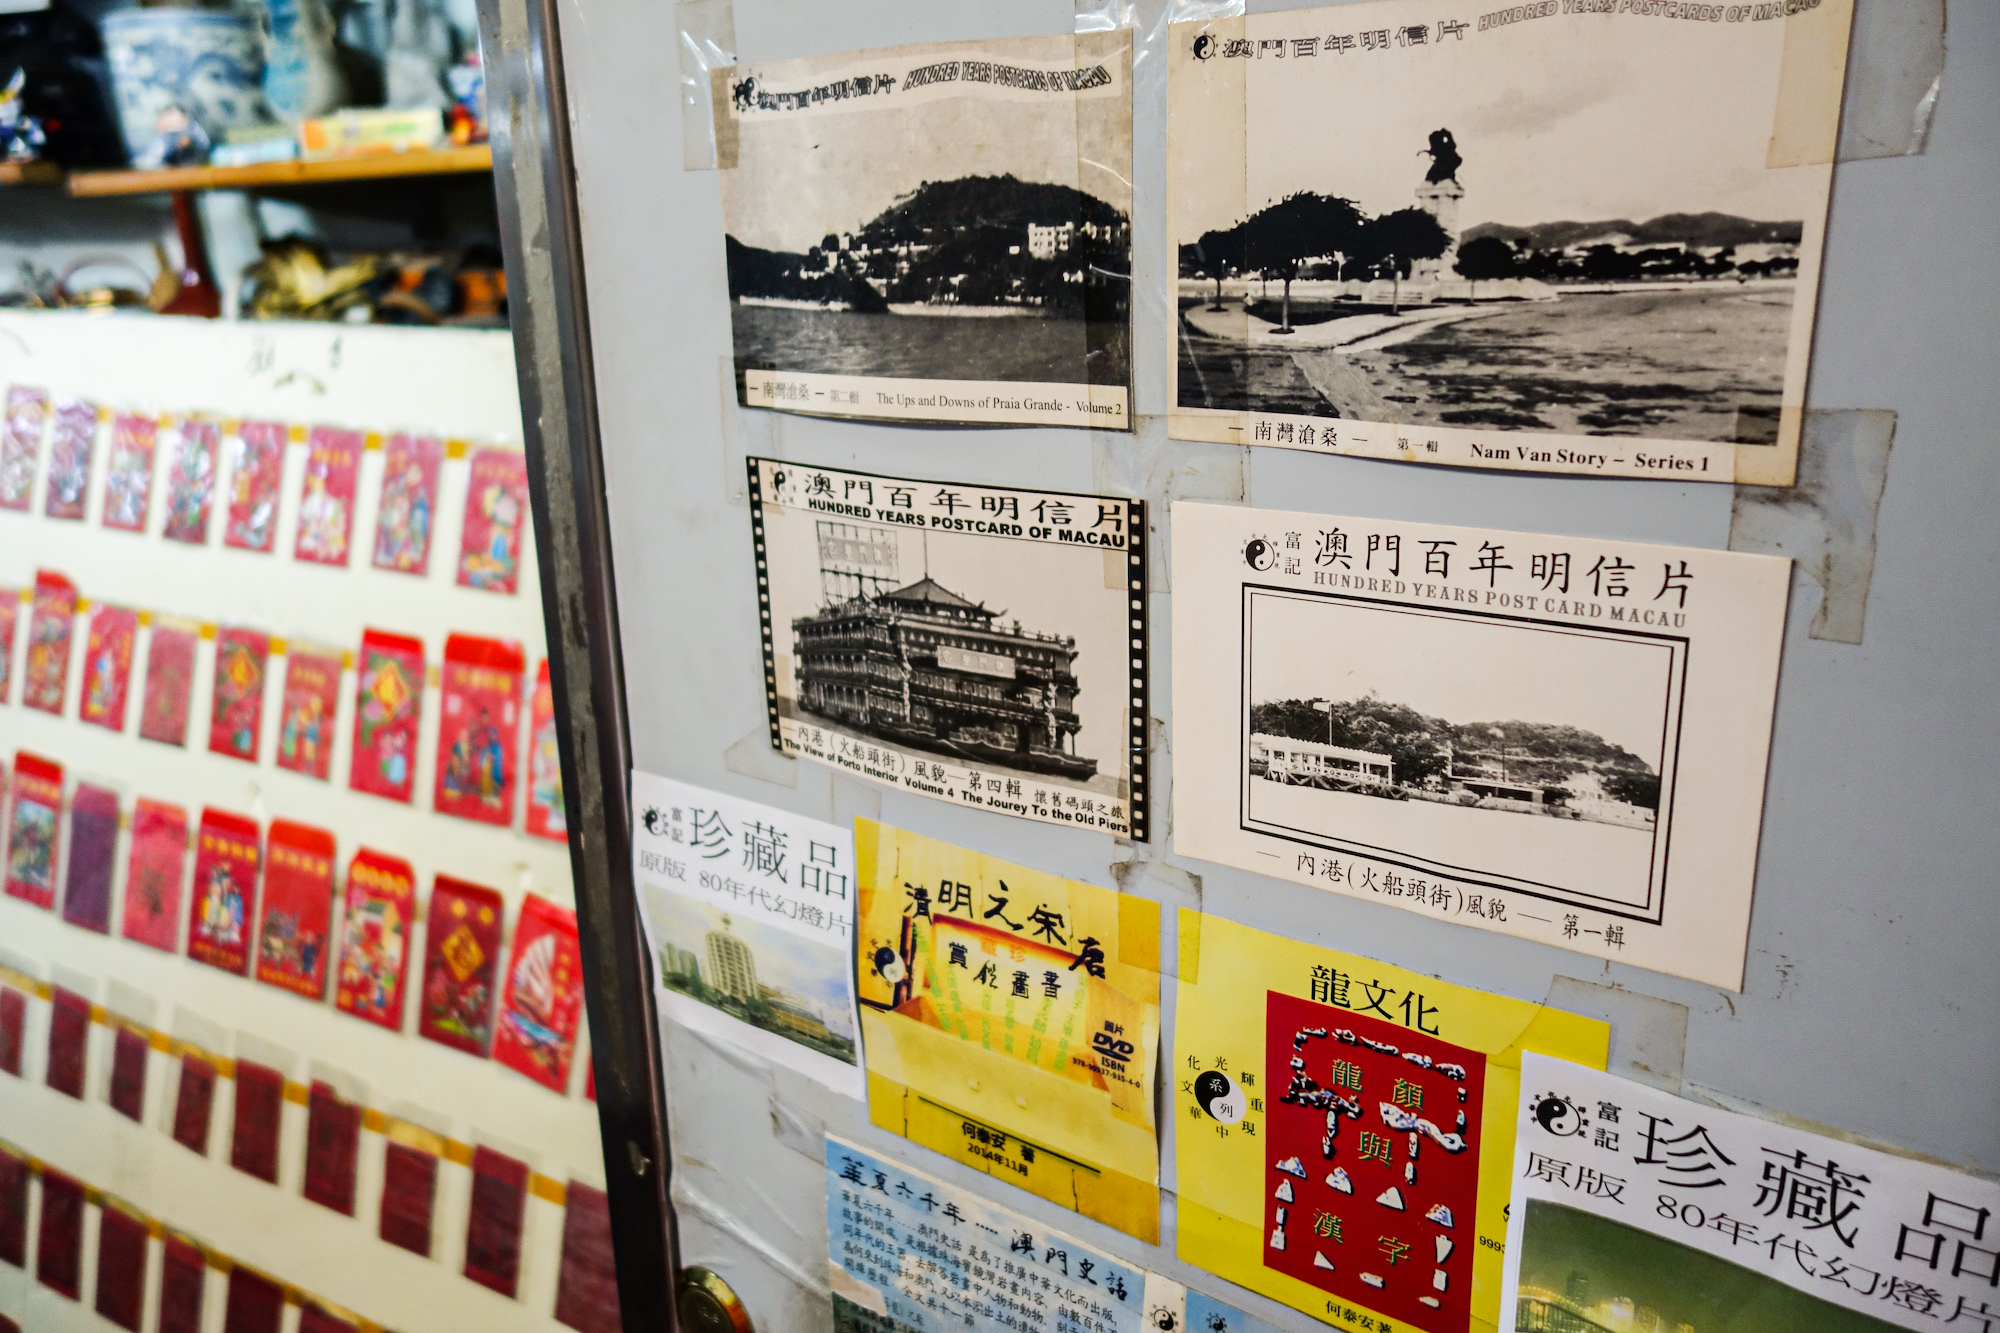 When creating postcard sets, Ho strives to capture the evolution of Macao’s landmarks and scenic locations over time 